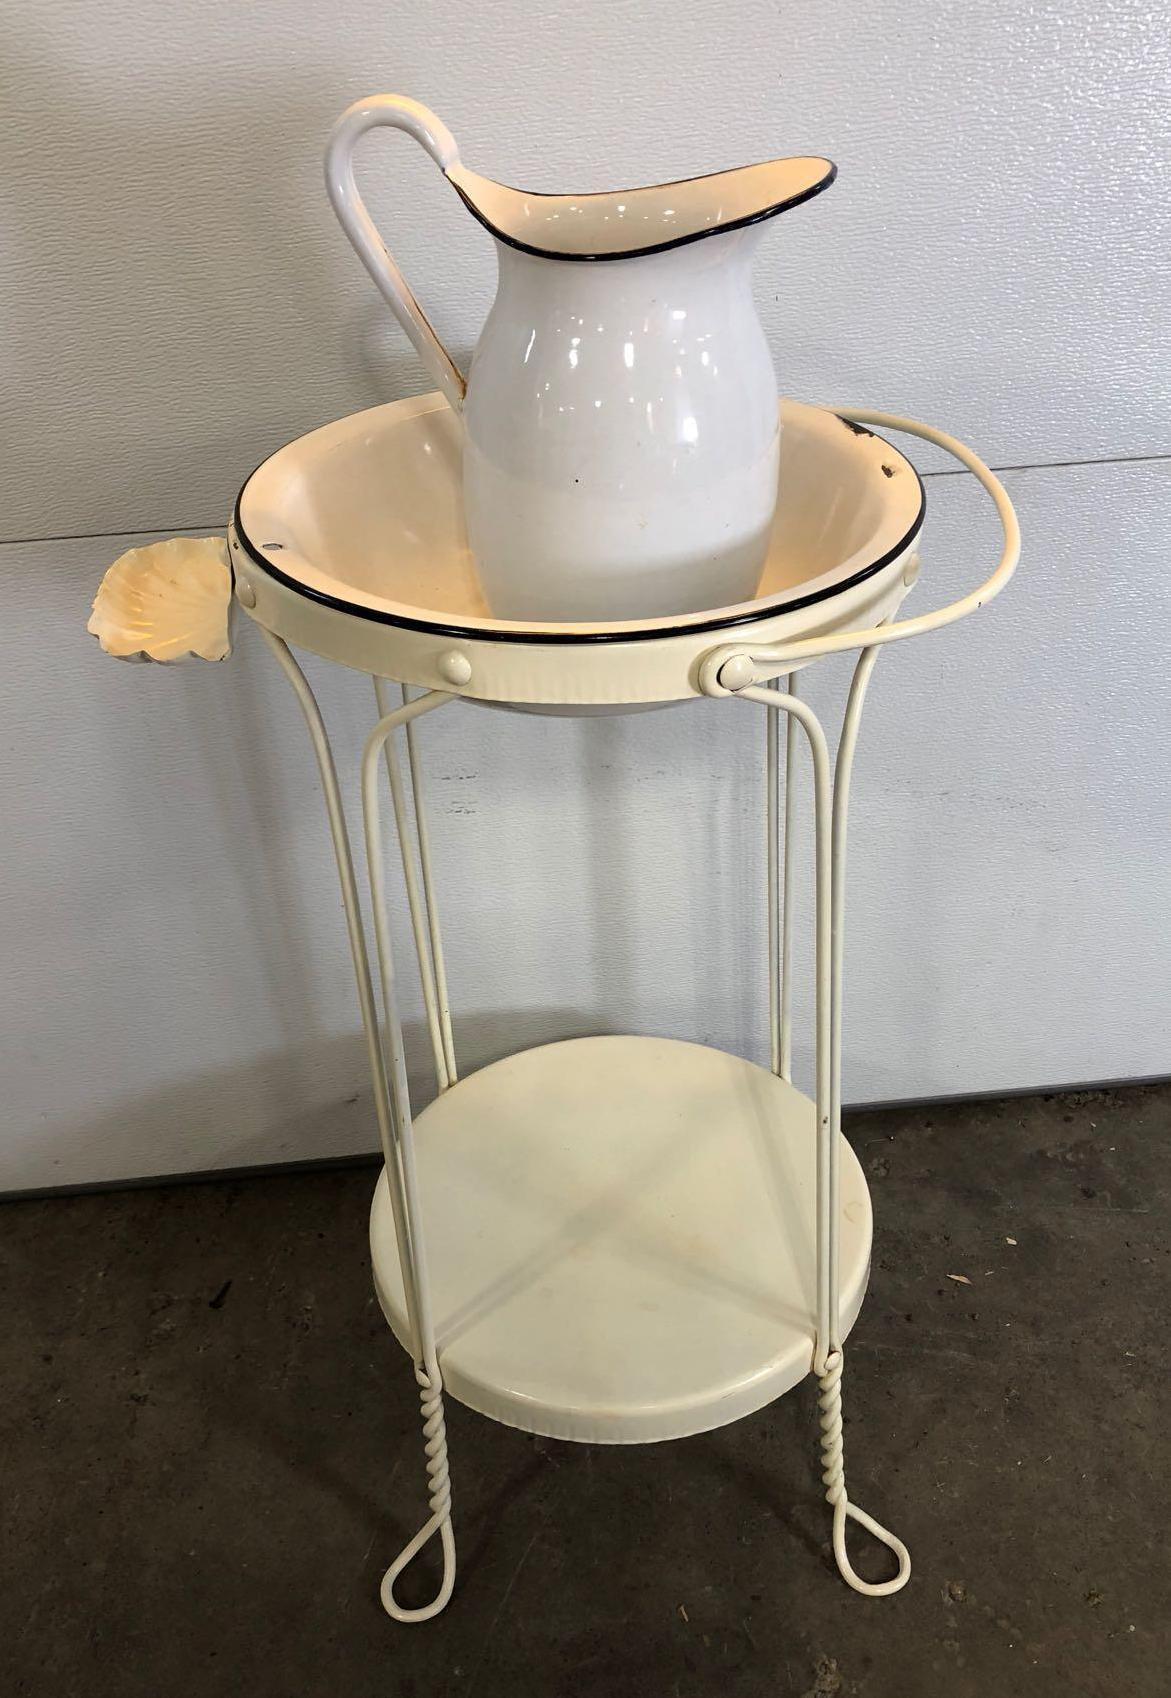 Antique metal wash stand/enamel pitcher and bowl